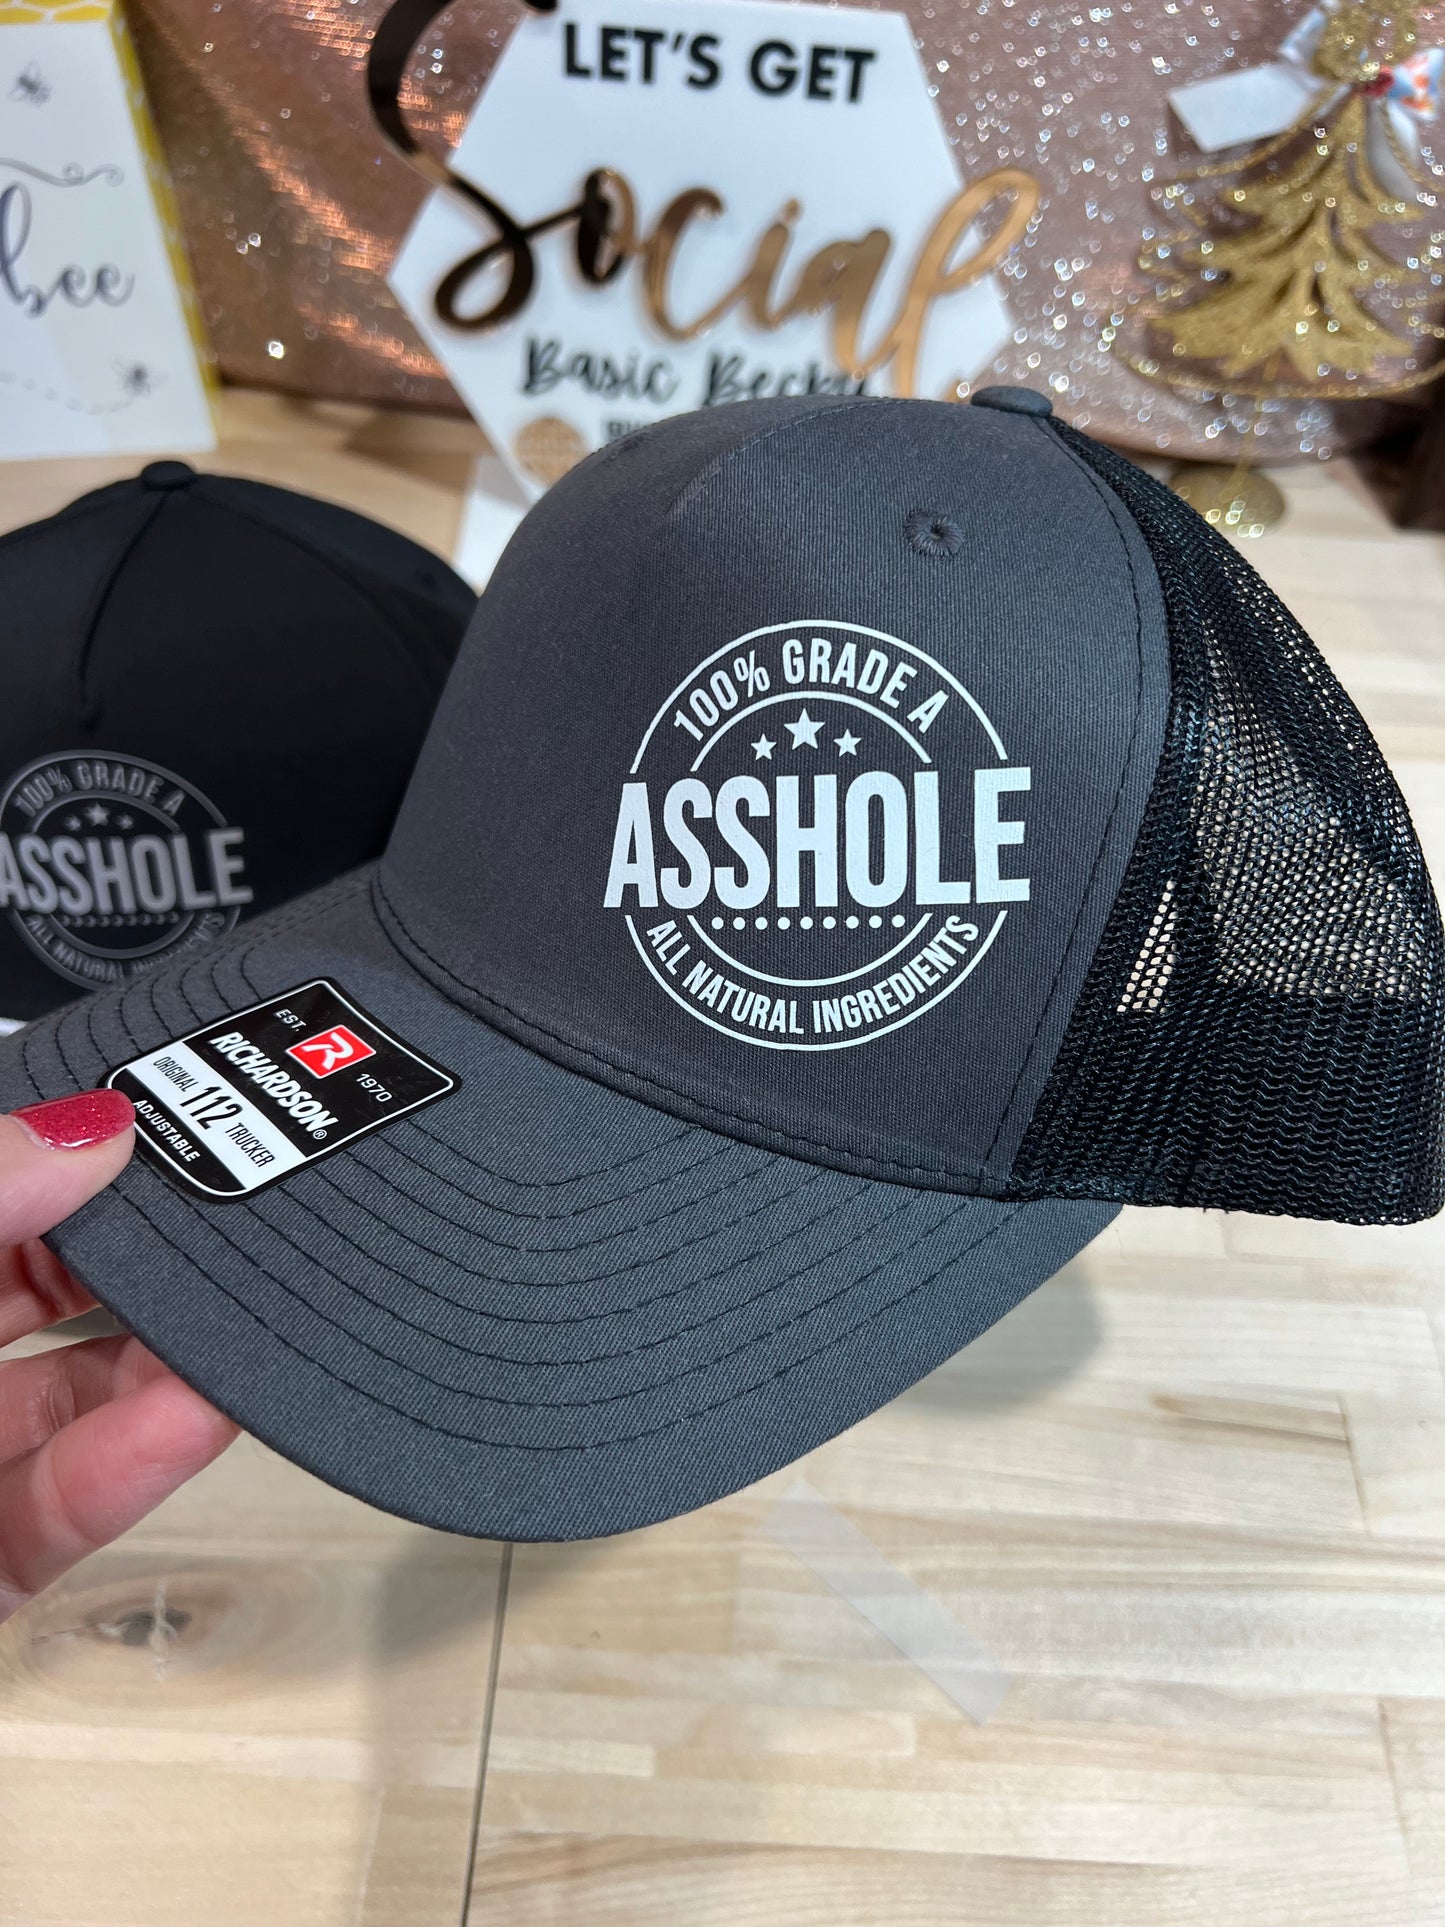 100% GRADE A ASSHOLE ALL NATURAL INGREDIENTS HAT